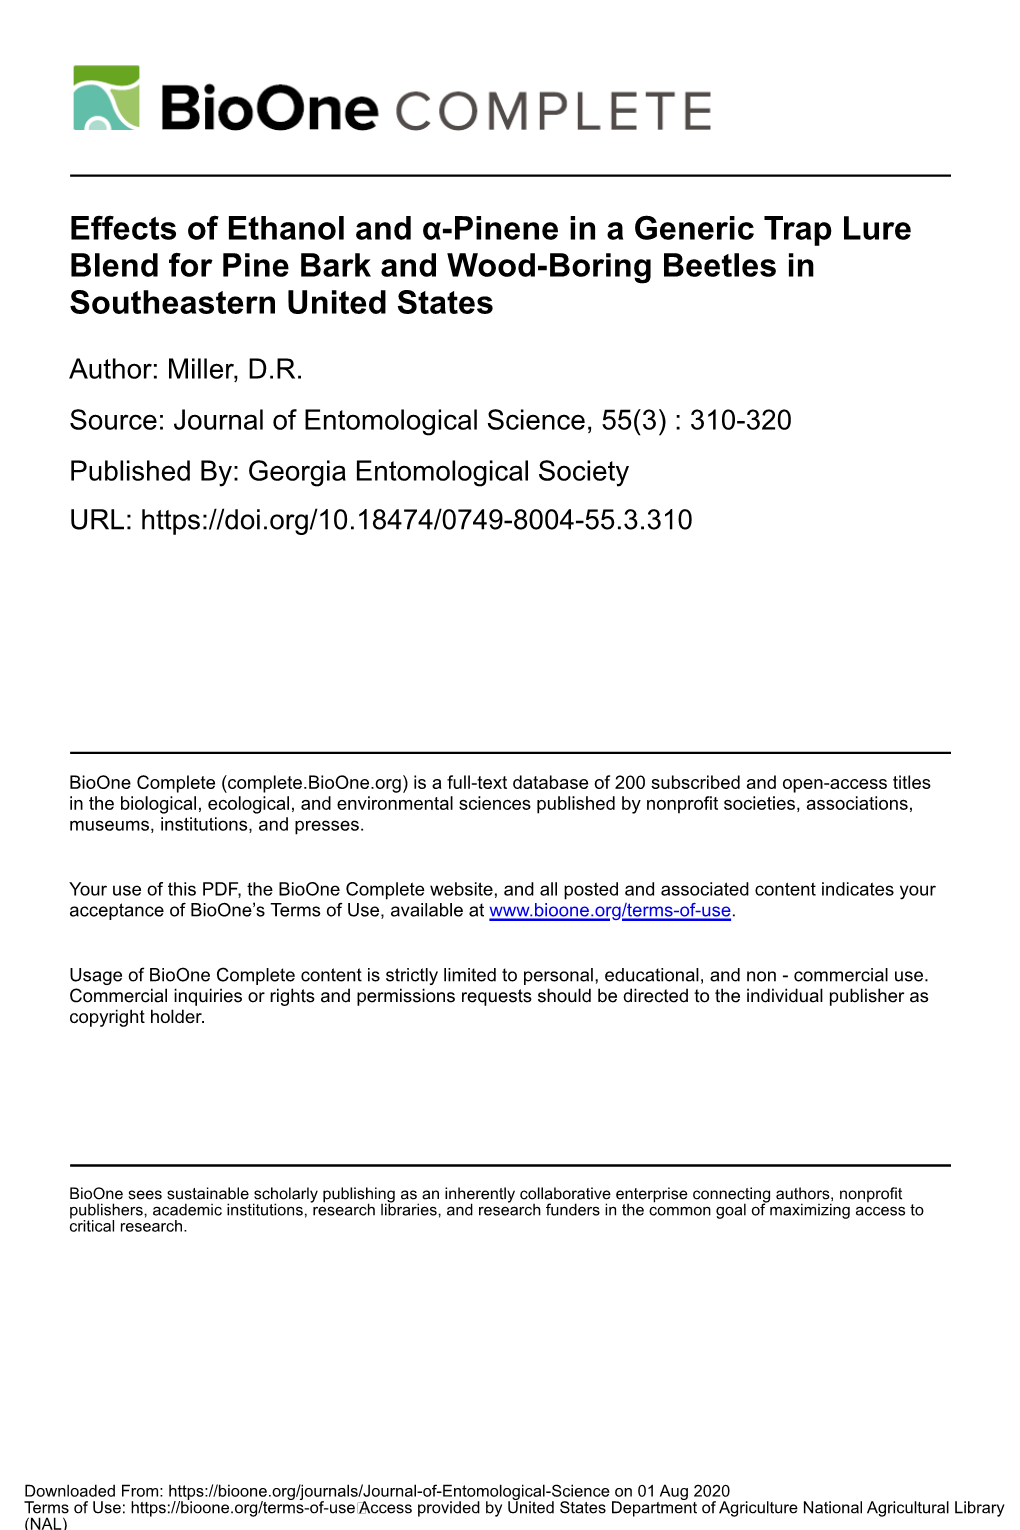 Effects of Ethanol and Α-Pinene in a Generic Trap Lure Blend for Pine Bark and Wood-Boring Beetles in Southeastern United States